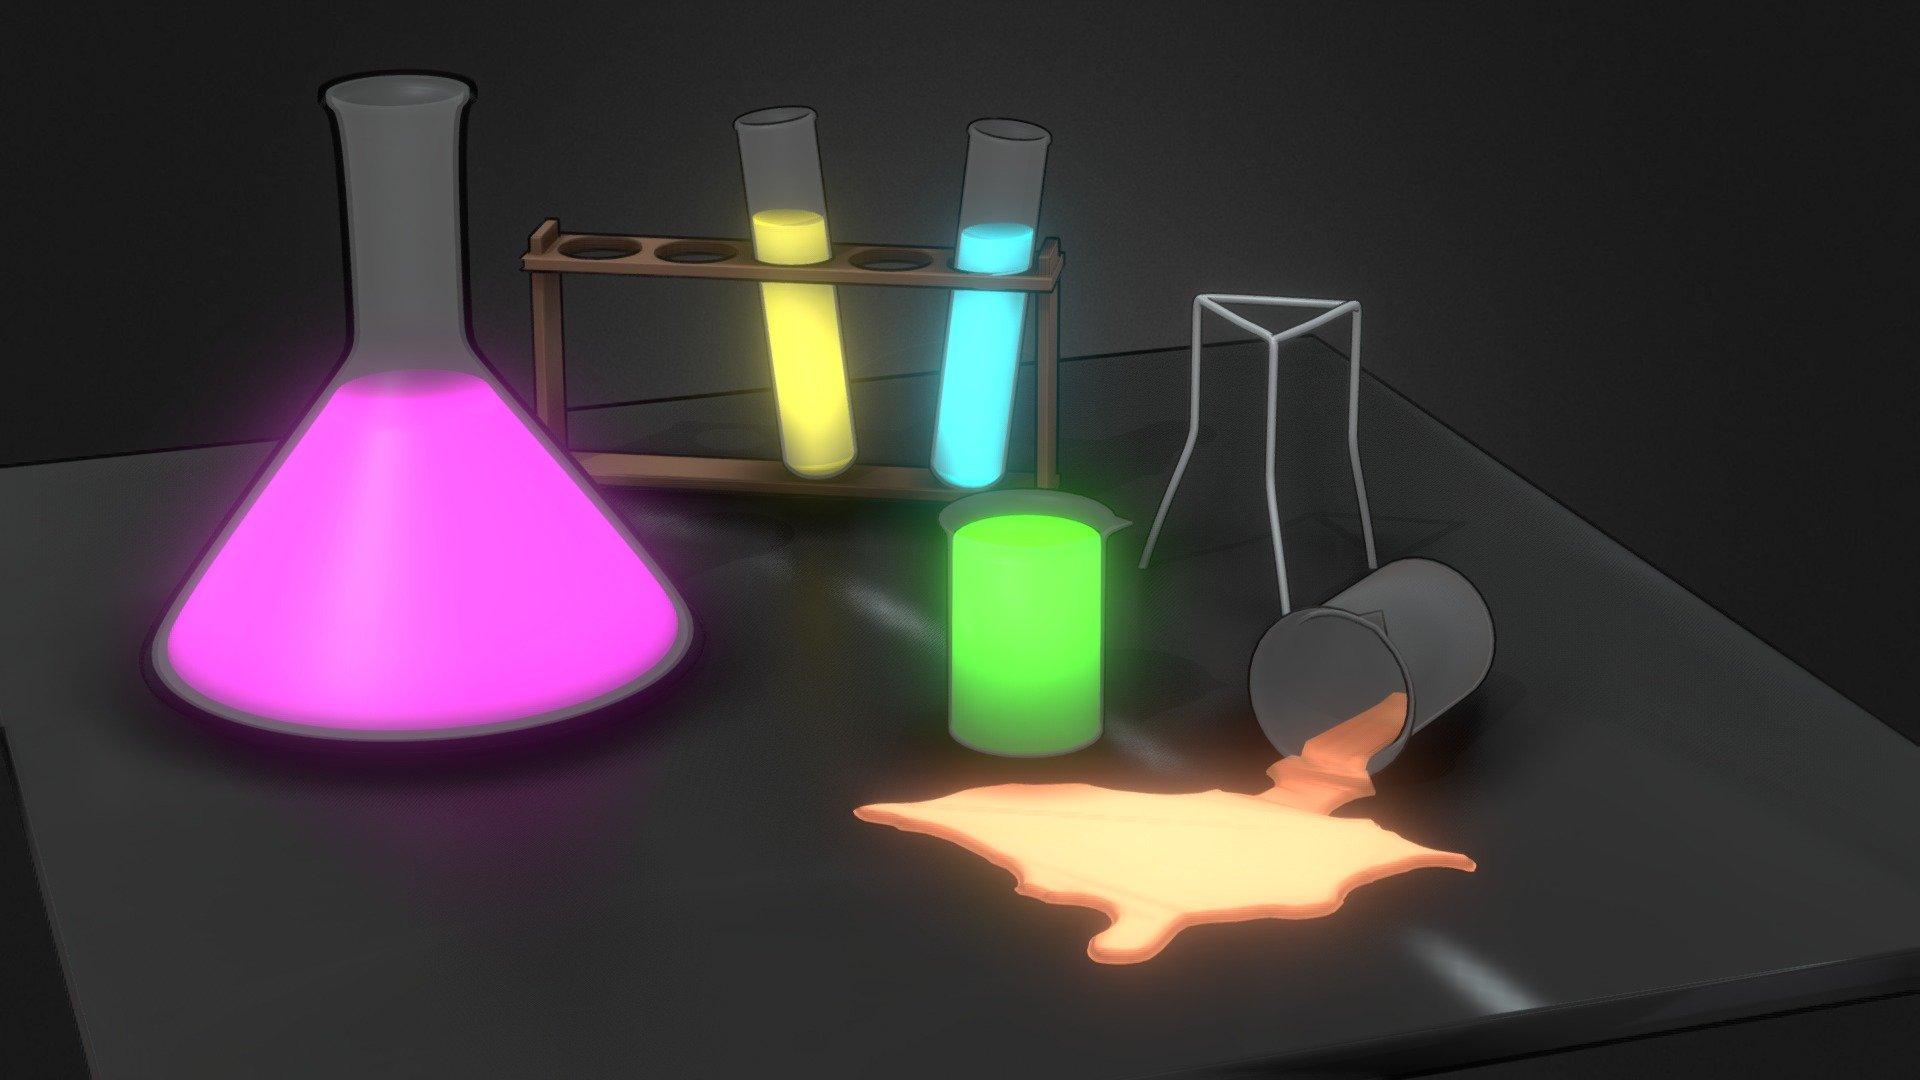 A facinating world of magic sits inside these jars,

but maybe thats where it should stay&hellip; - Cartoon science equipment - Download Free 3D model by Brendan Wood (@brendanwood872) 3d model